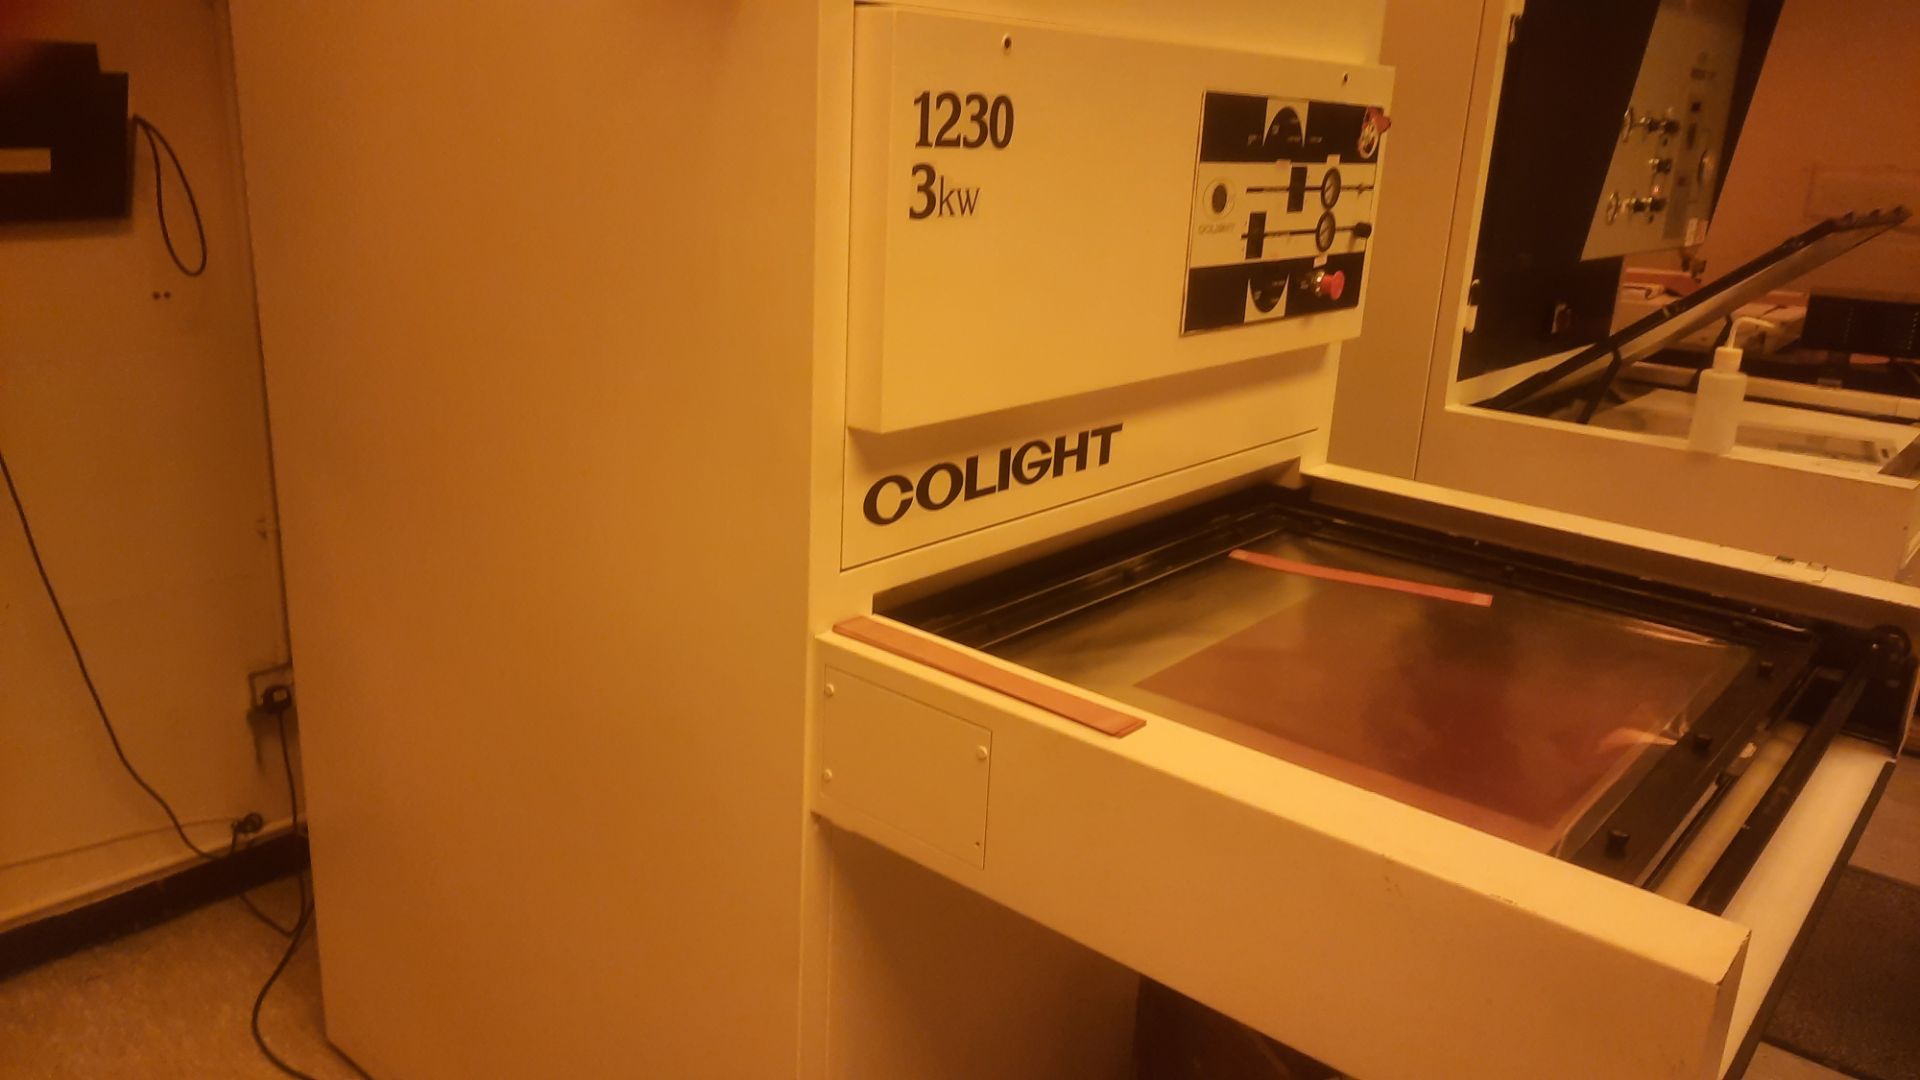 1: Colight, 1230, Two Drawer Exposure Unit, Serial Number: 7354-309D, Year of Manufacture: 12/89 - Image 2 of 3